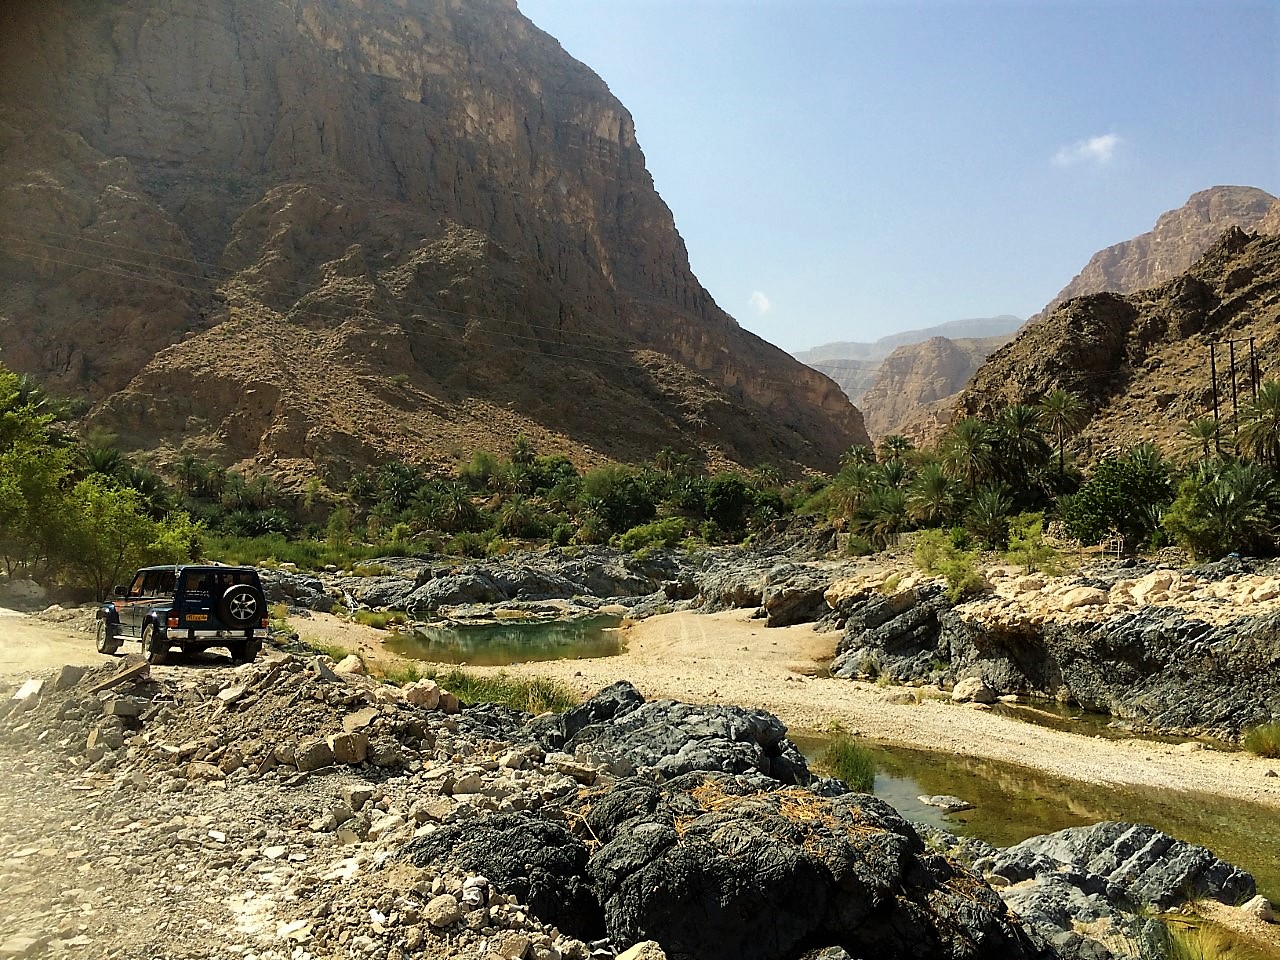 wadi-arbayeen-the-village-to-the-left-of-the-car.jpg